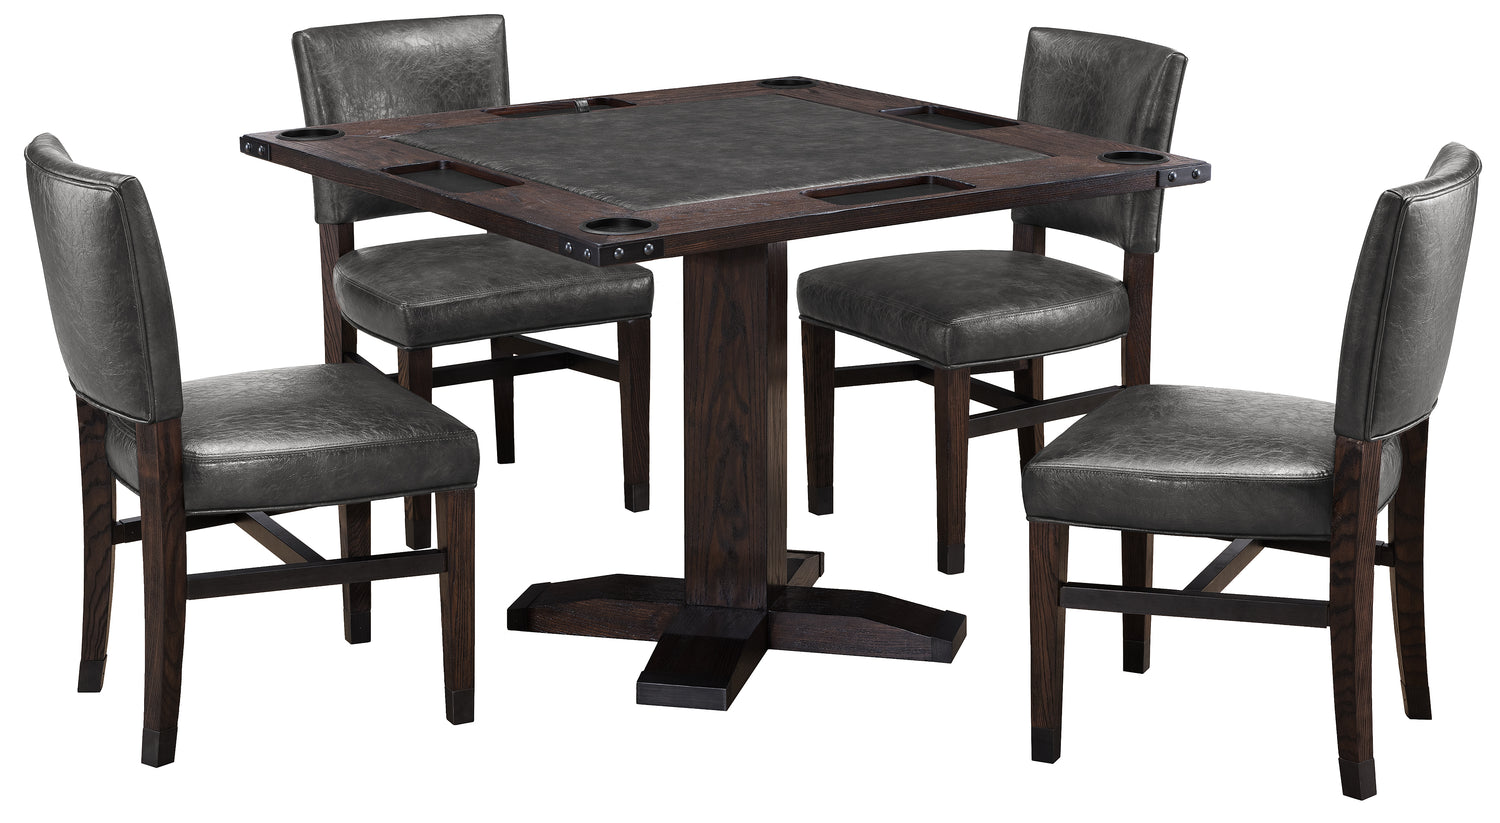 Legacy Billiards Harpeth Dining Chairs with Matching Rustic Game Table